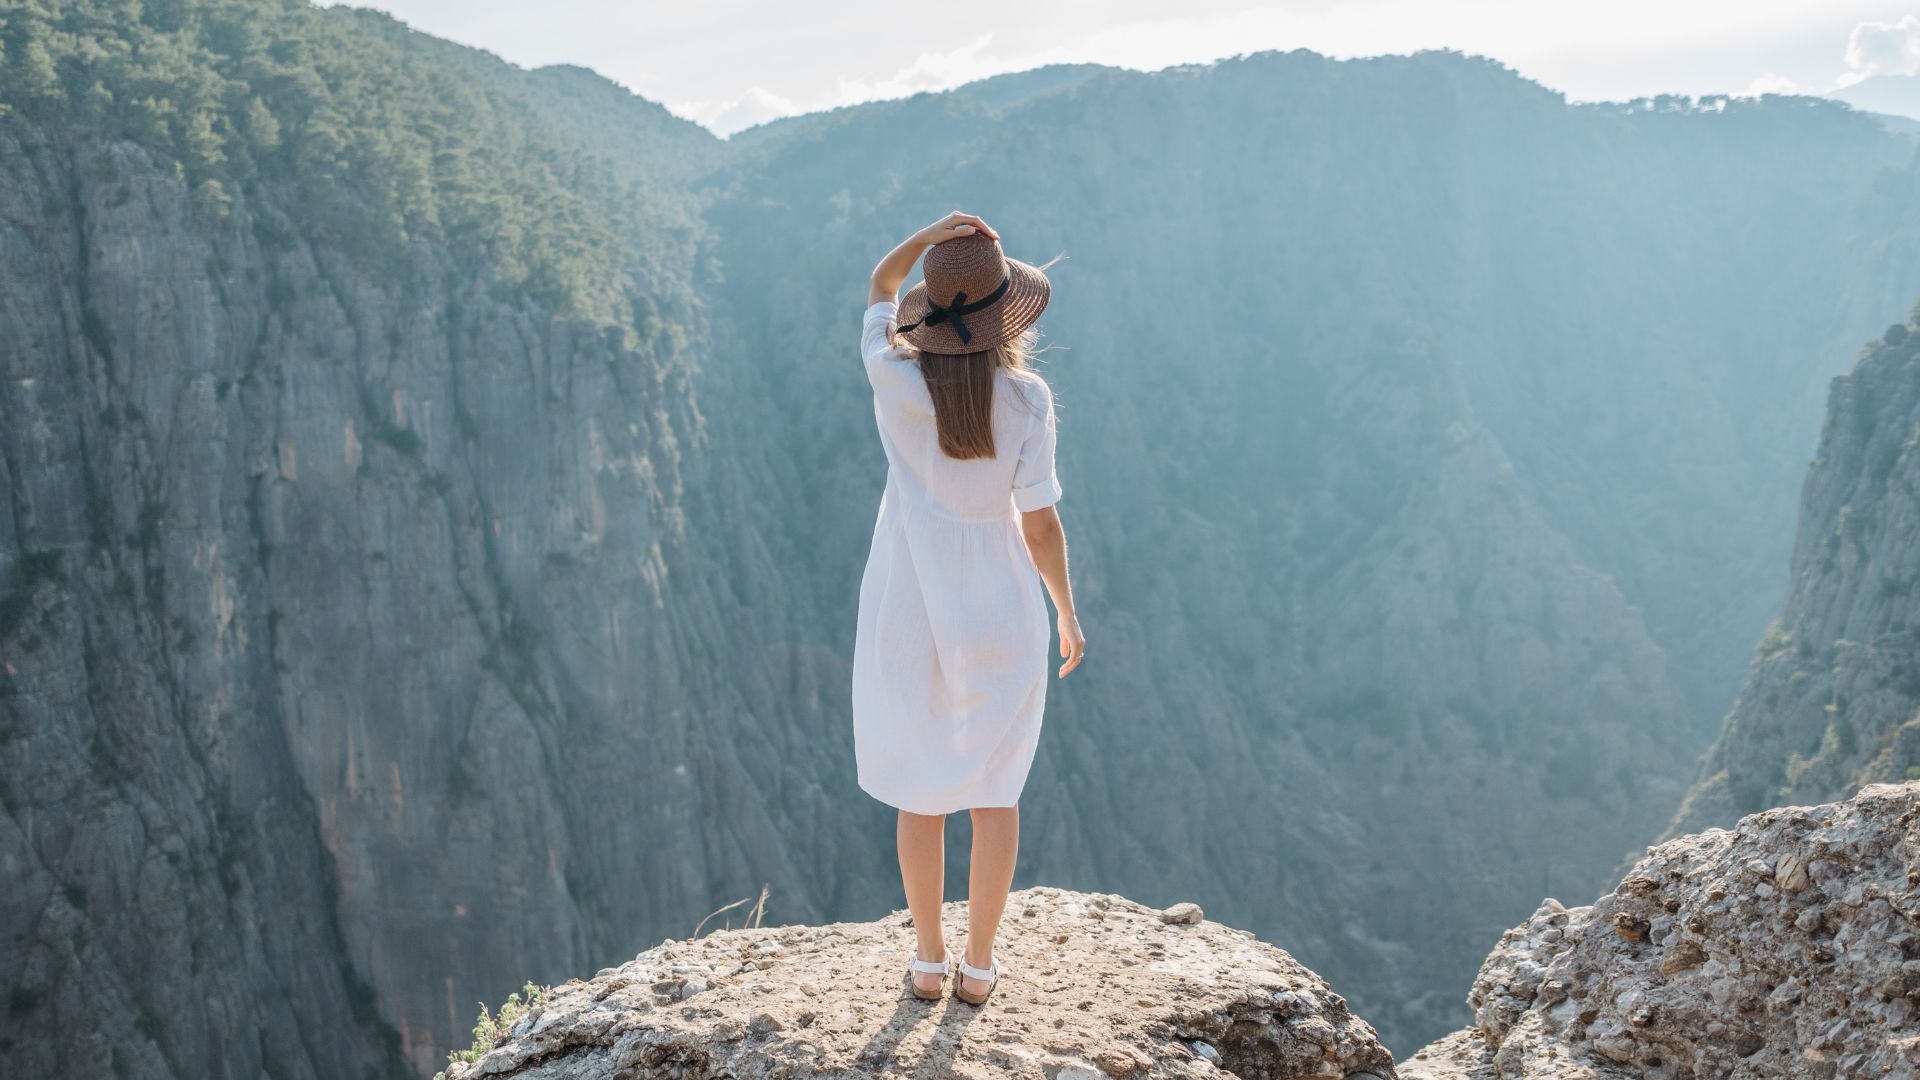 woman in white dress and a tan sun hat overlooking a green canyon with gray rock walls during the daylight